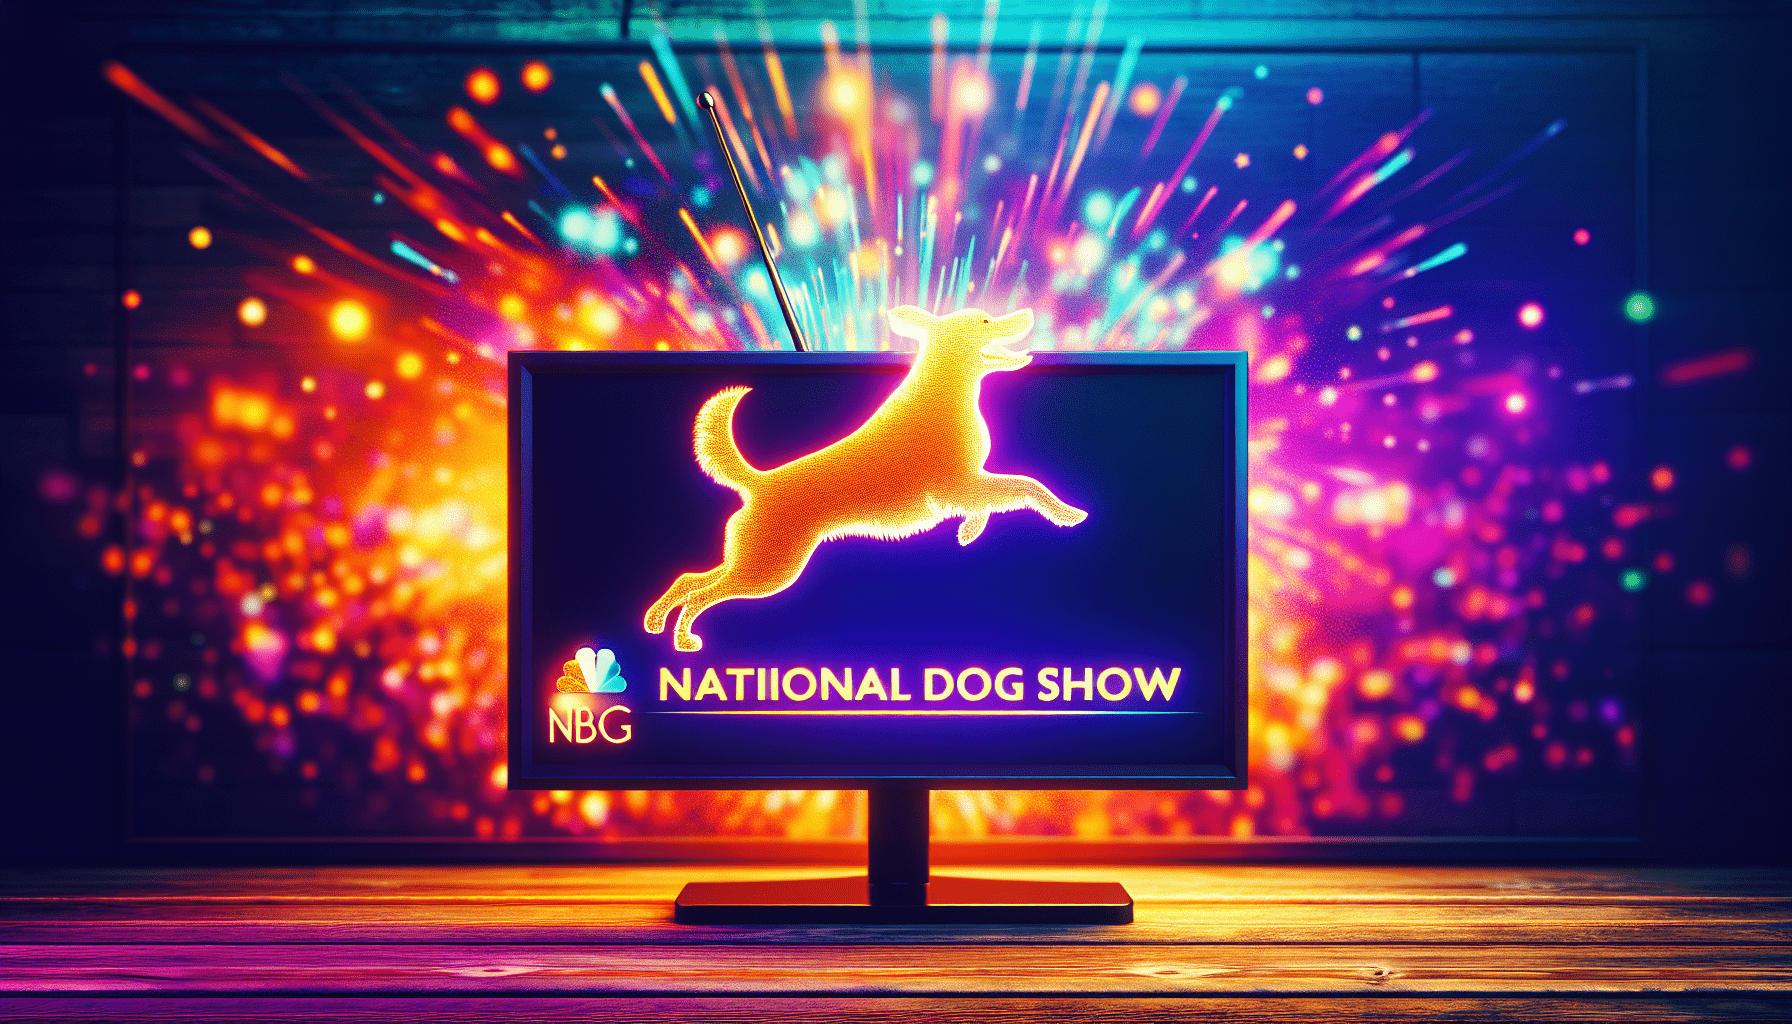 What Streaming Service Has The National Dog Show?